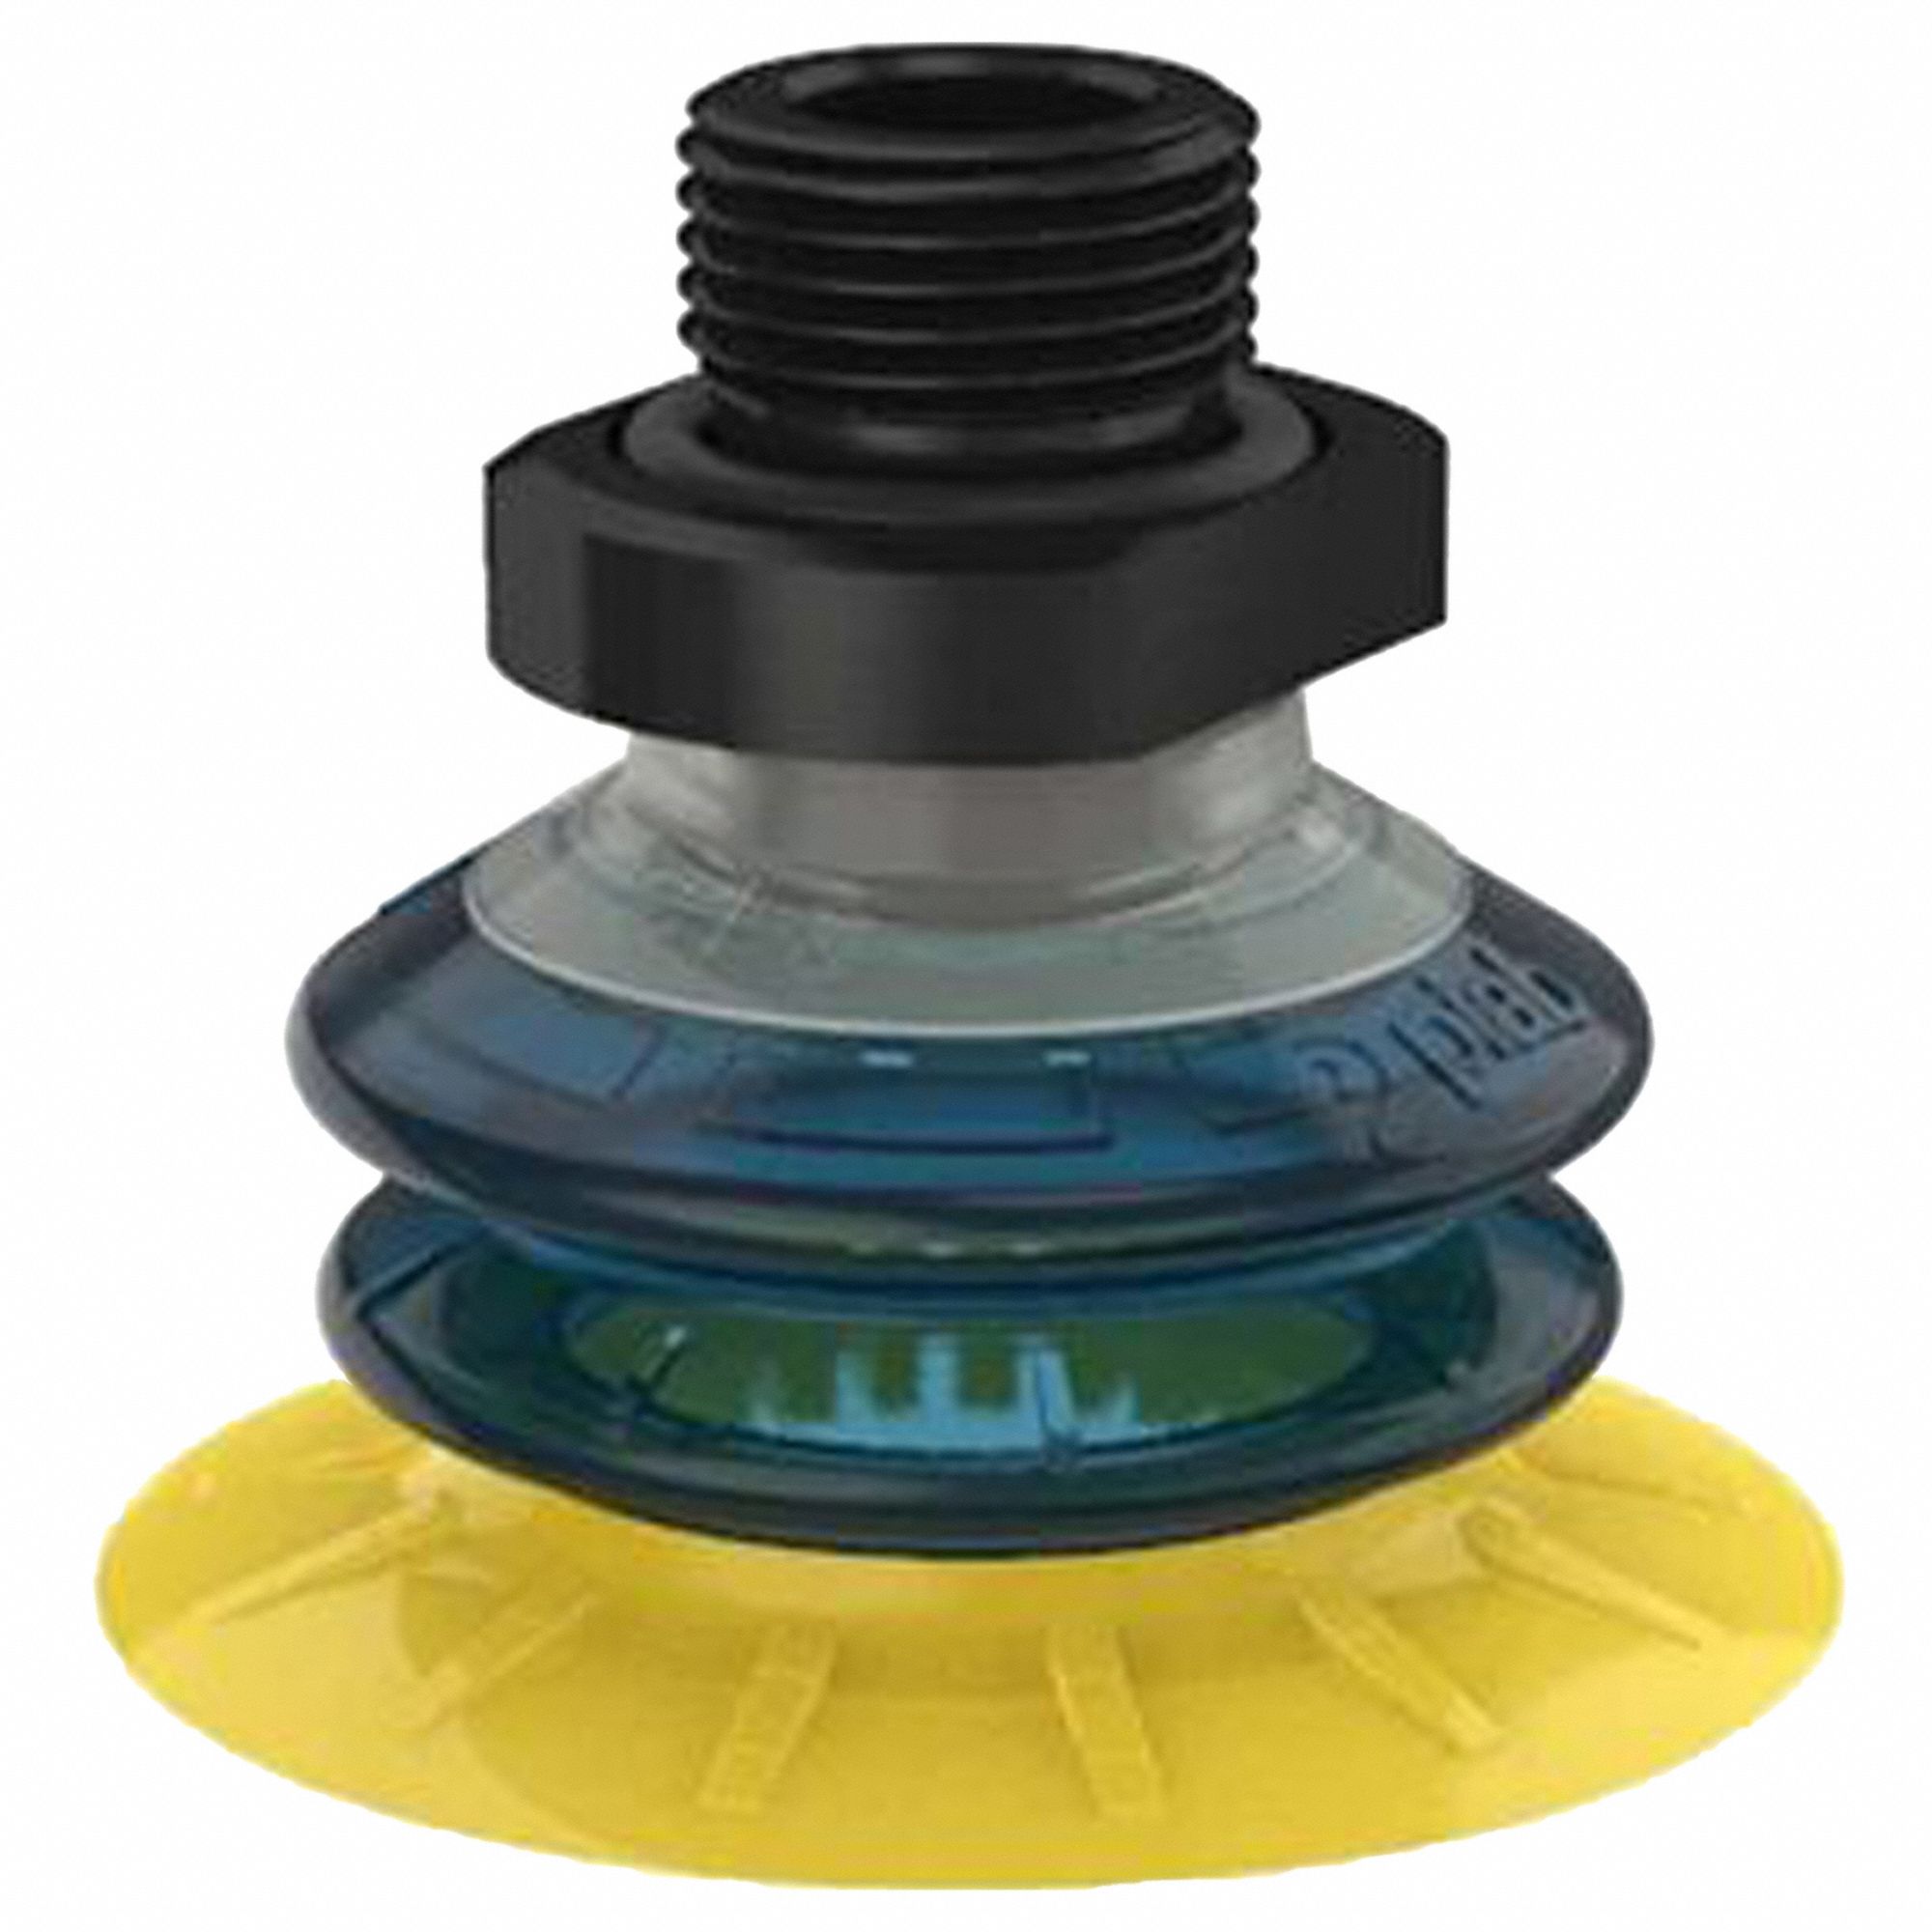 Suction Cup MX family